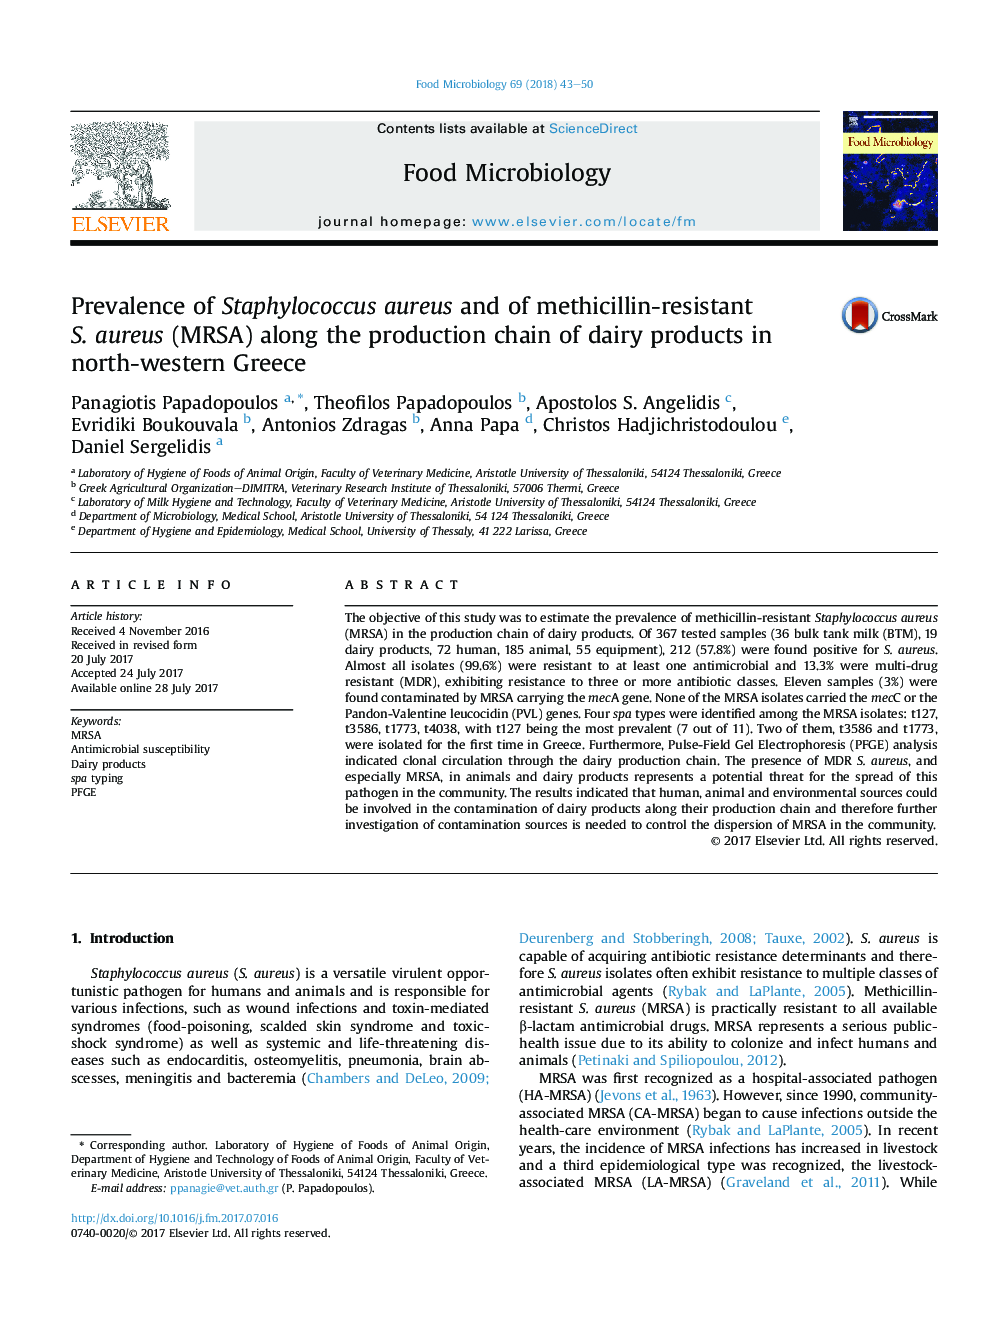 Prevalence of Staphylococcus aureus and of methicillin-resistant S.Â aureus (MRSA) along the production chain of dairy products in north-western Greece